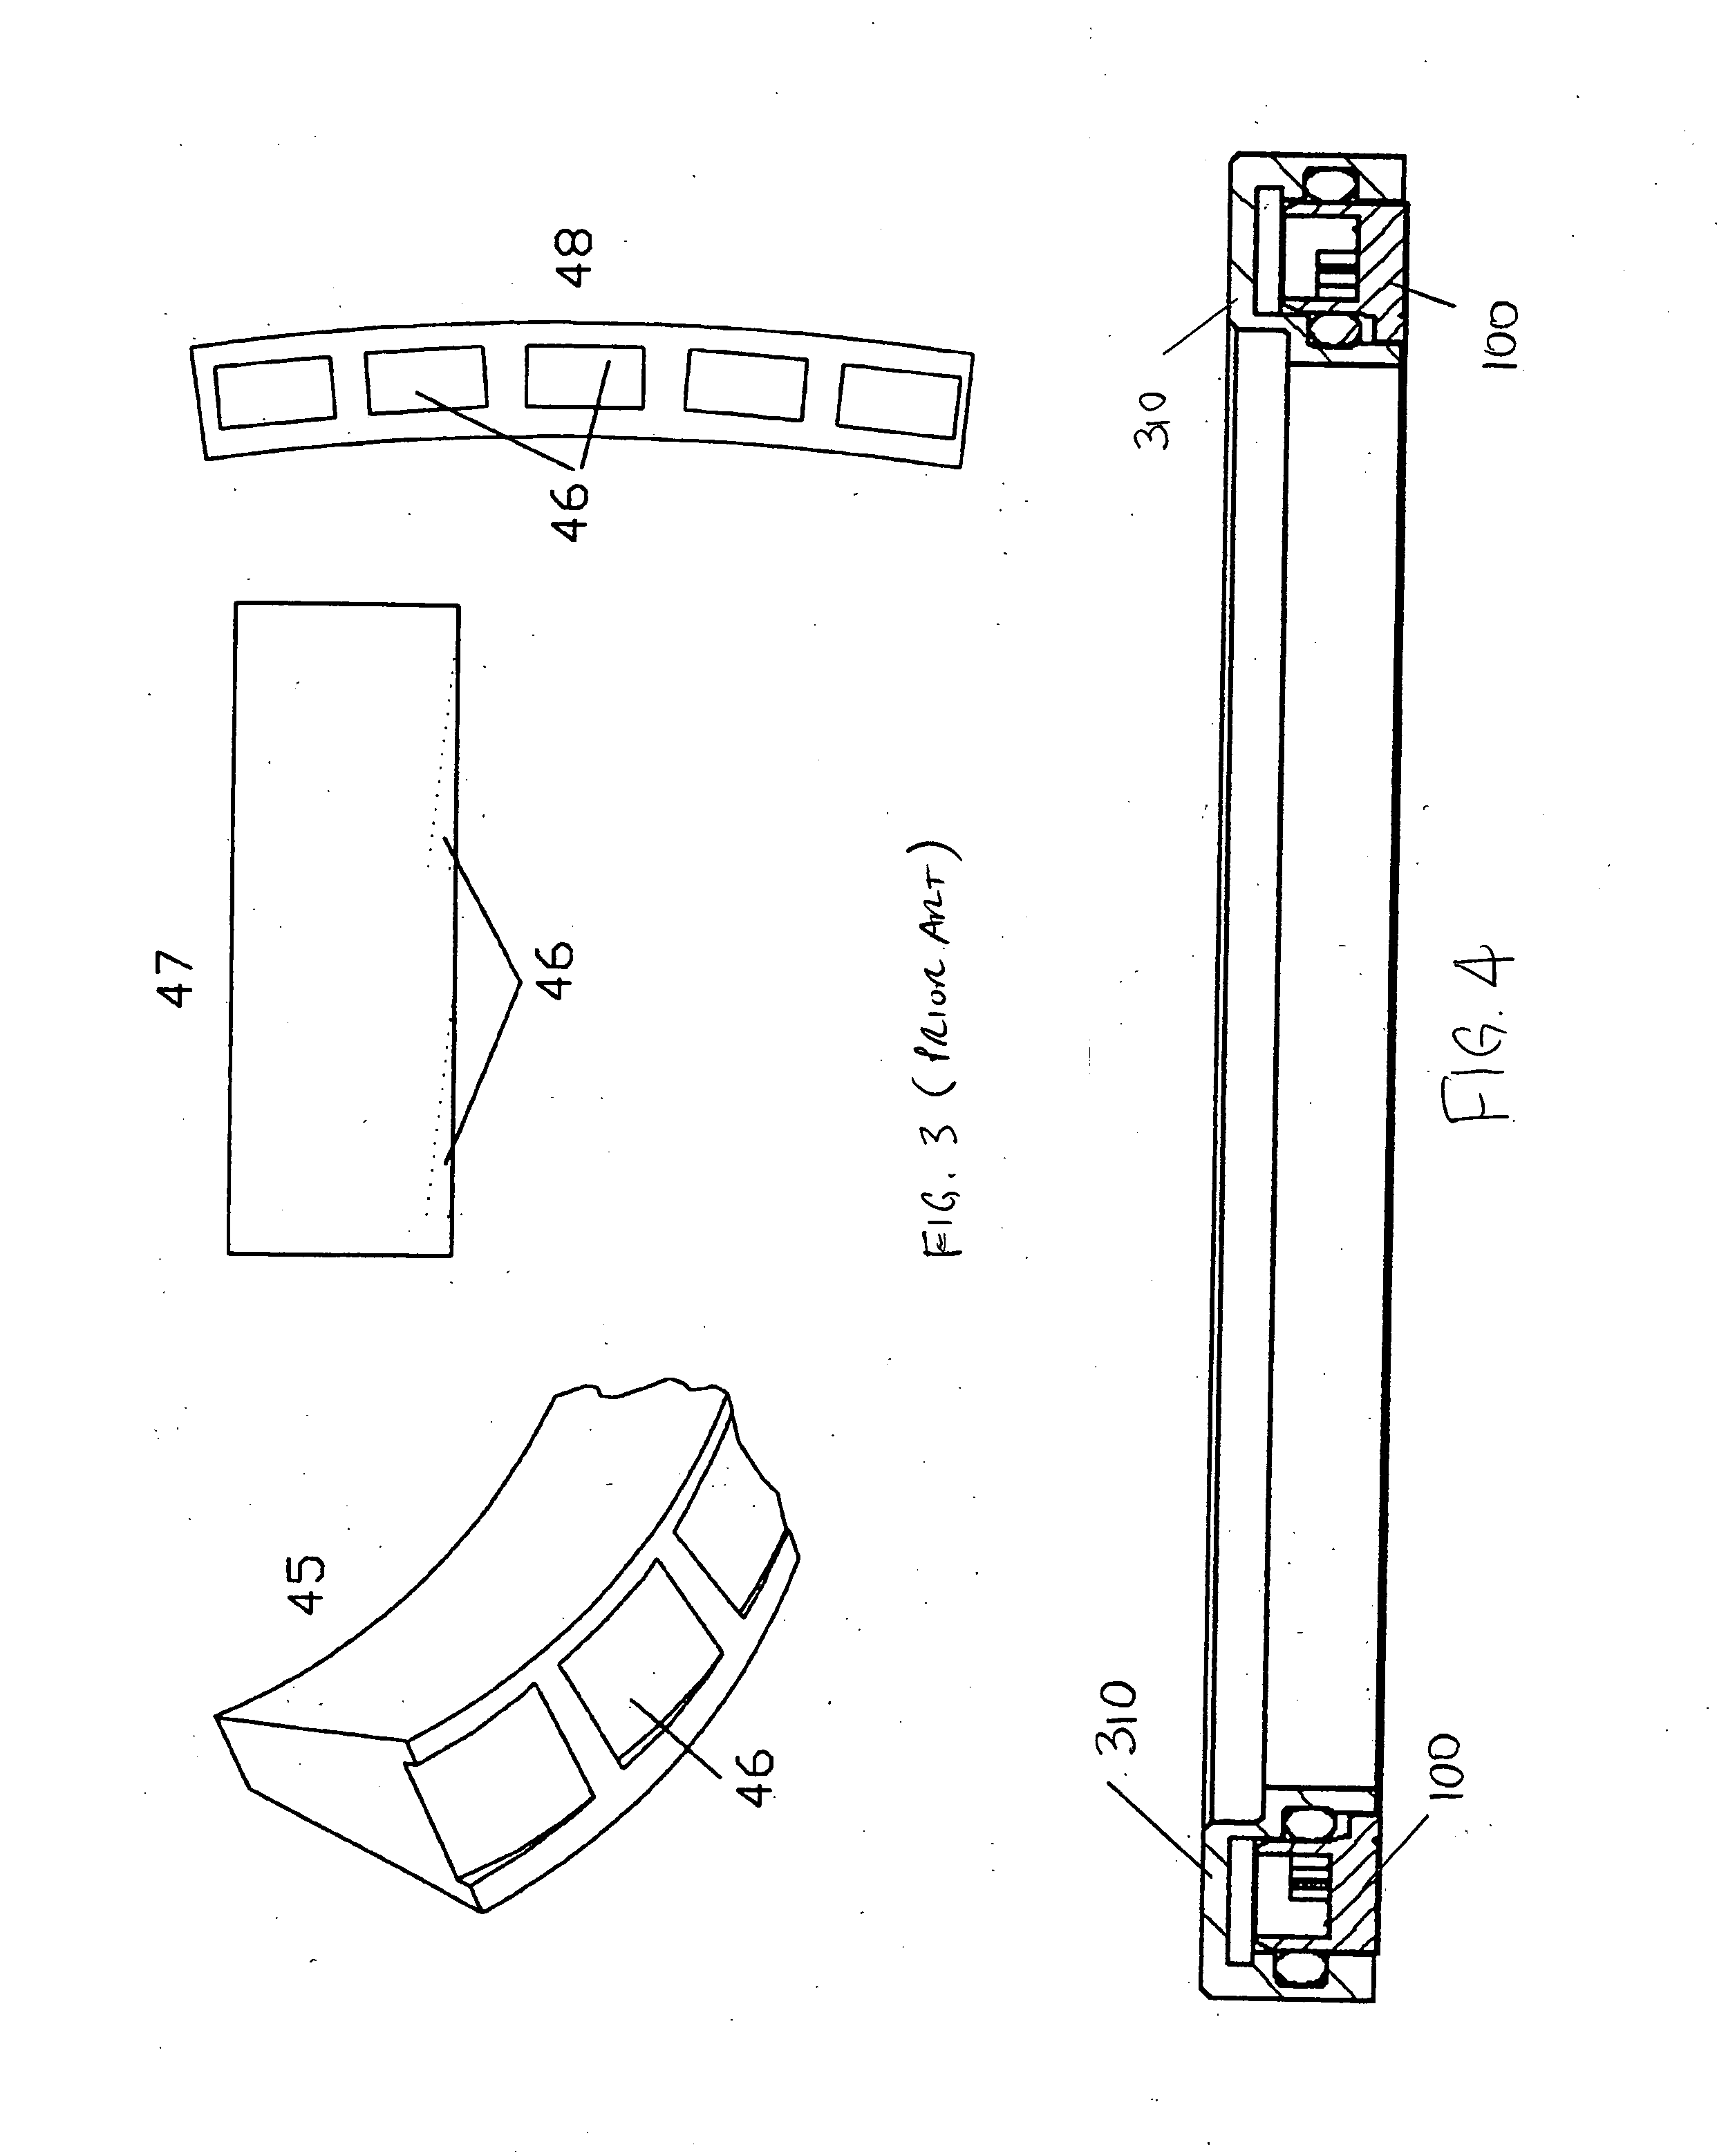 Apparatus and method for rotating sleeve engine hydrodynamic seal